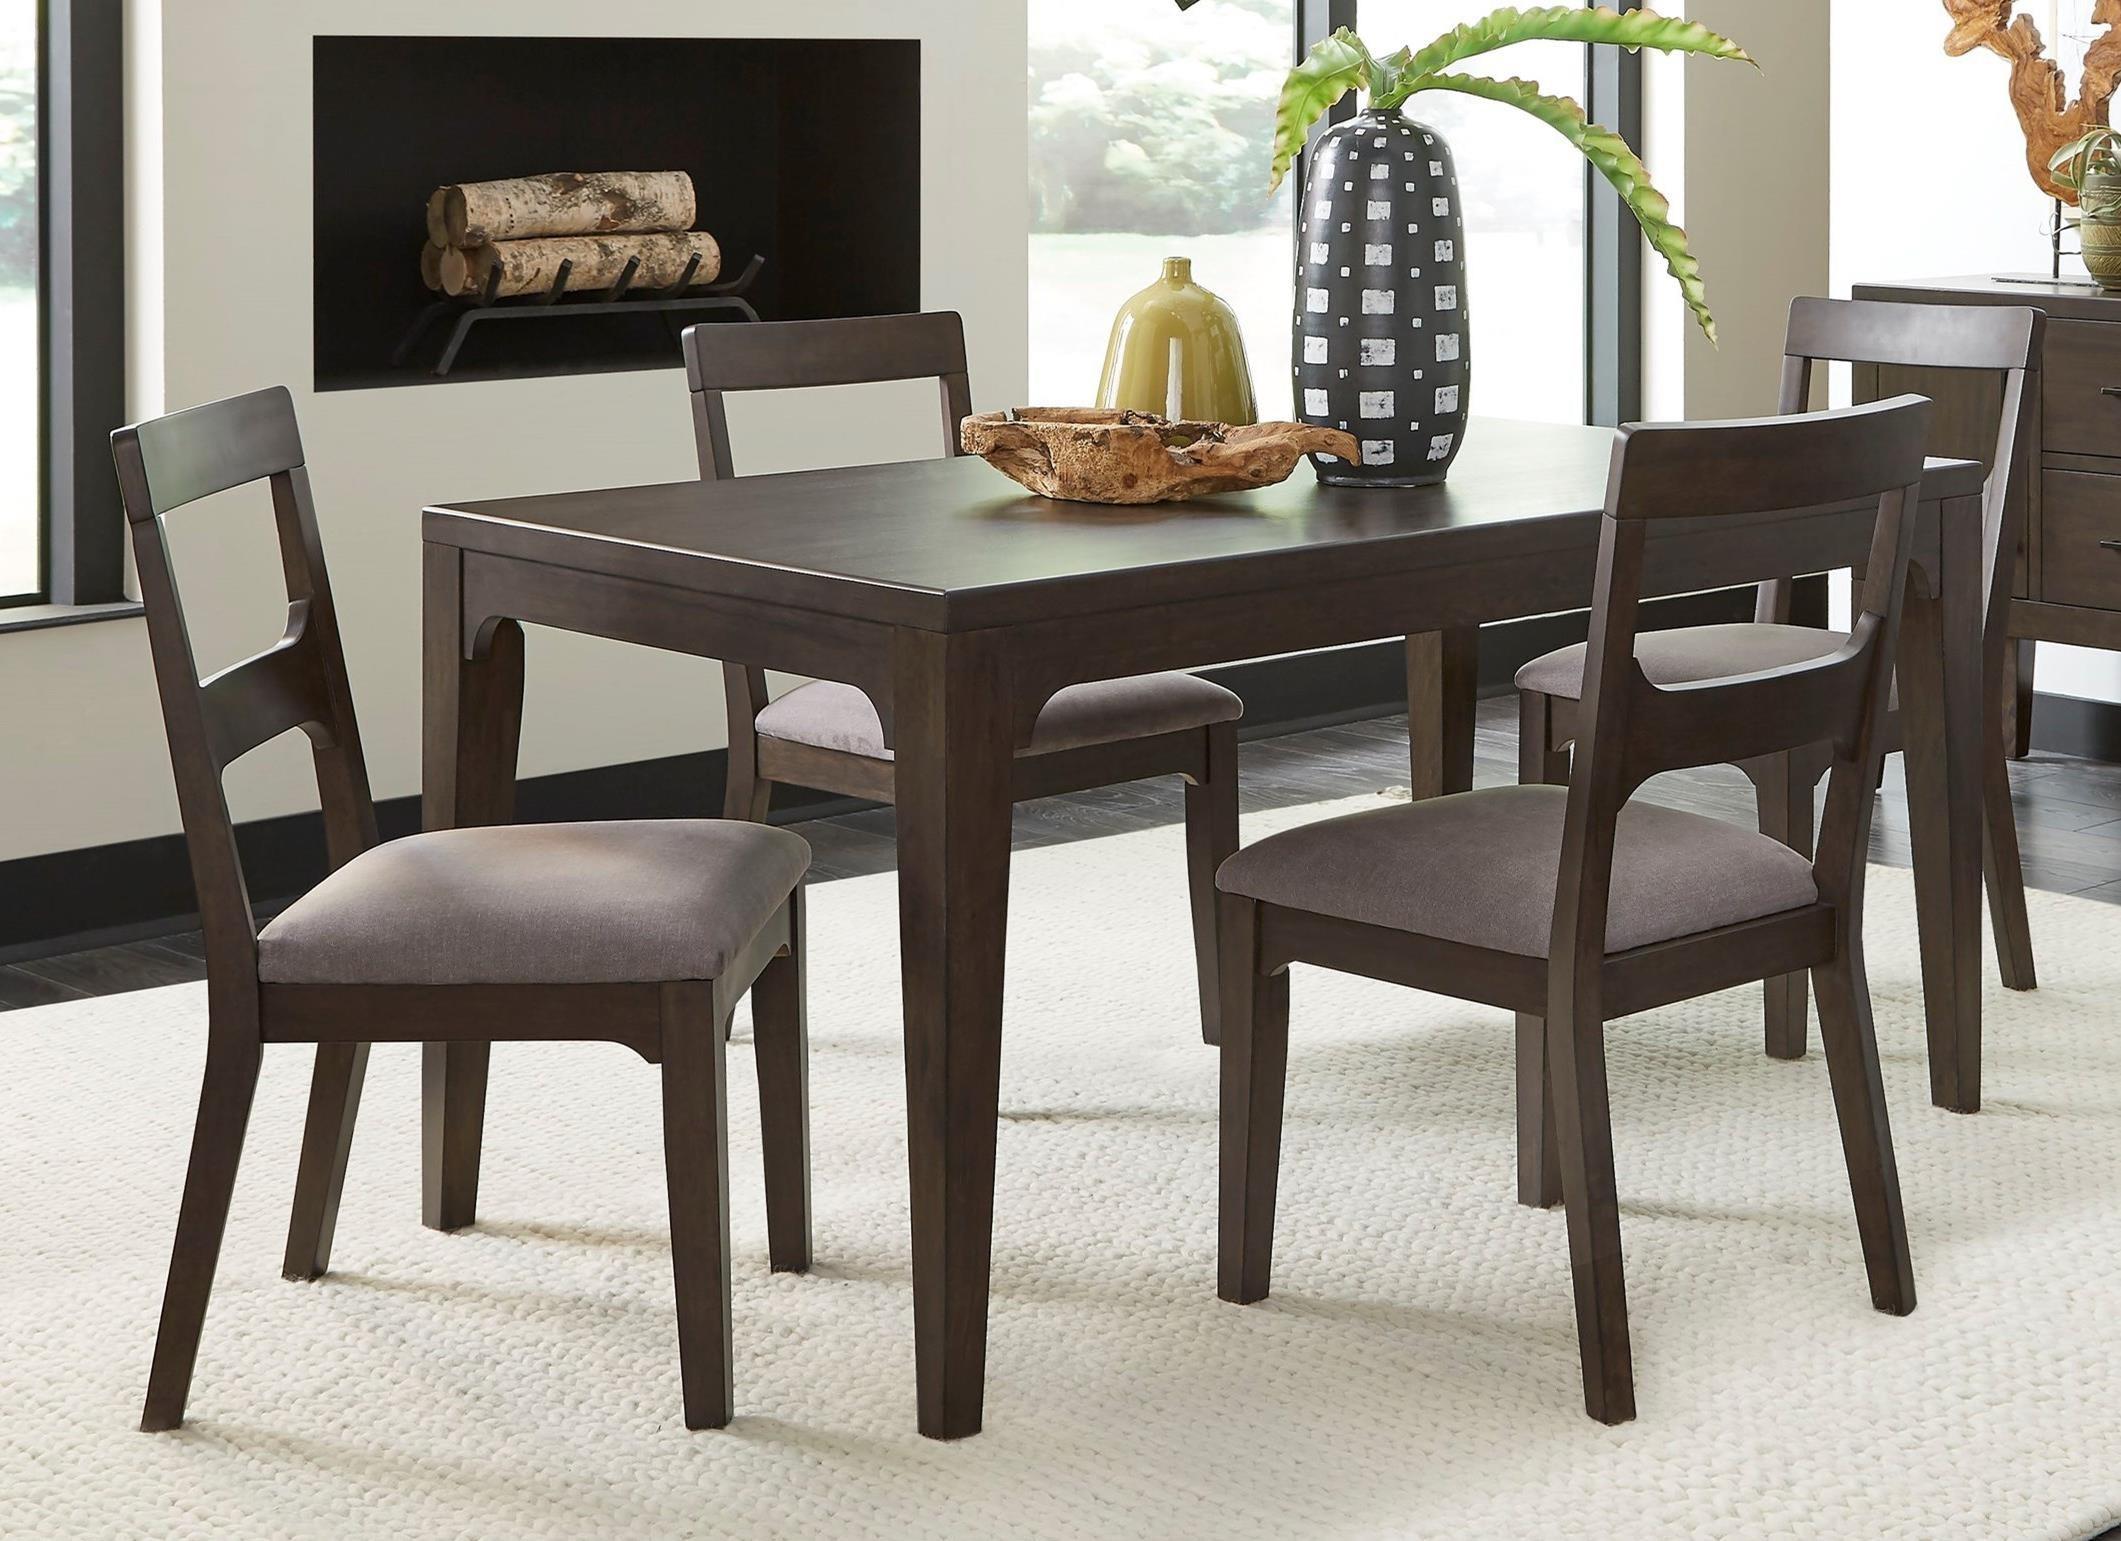 

    
Brown Horse Finish Mid-century Style Dining Room Set 5Pcs BRYCE by Modus Furniture
